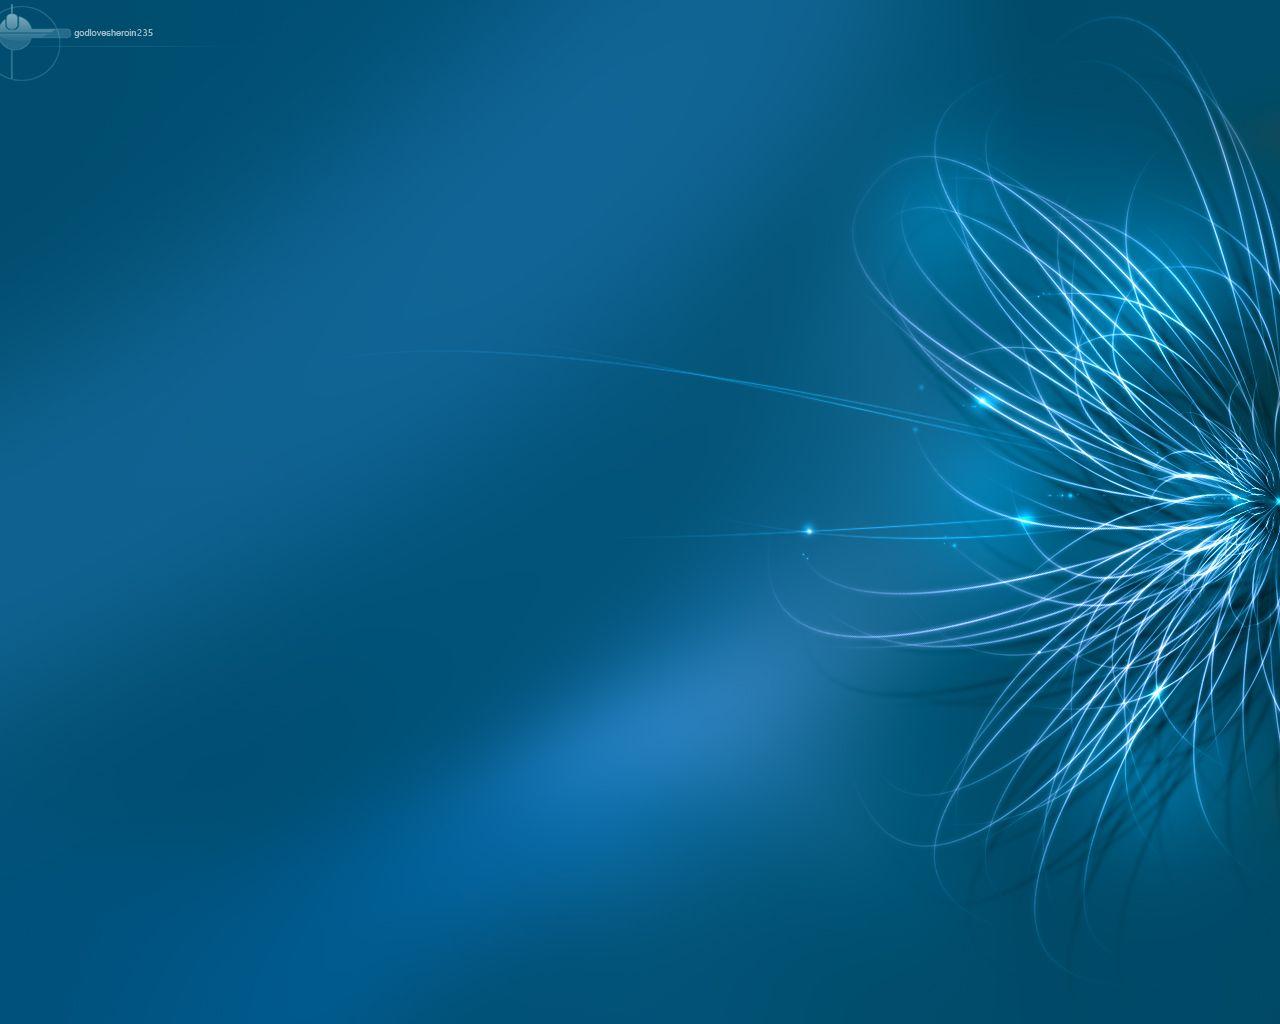 Kinds Of Wallpaper: Blue Abstract Wallpaper